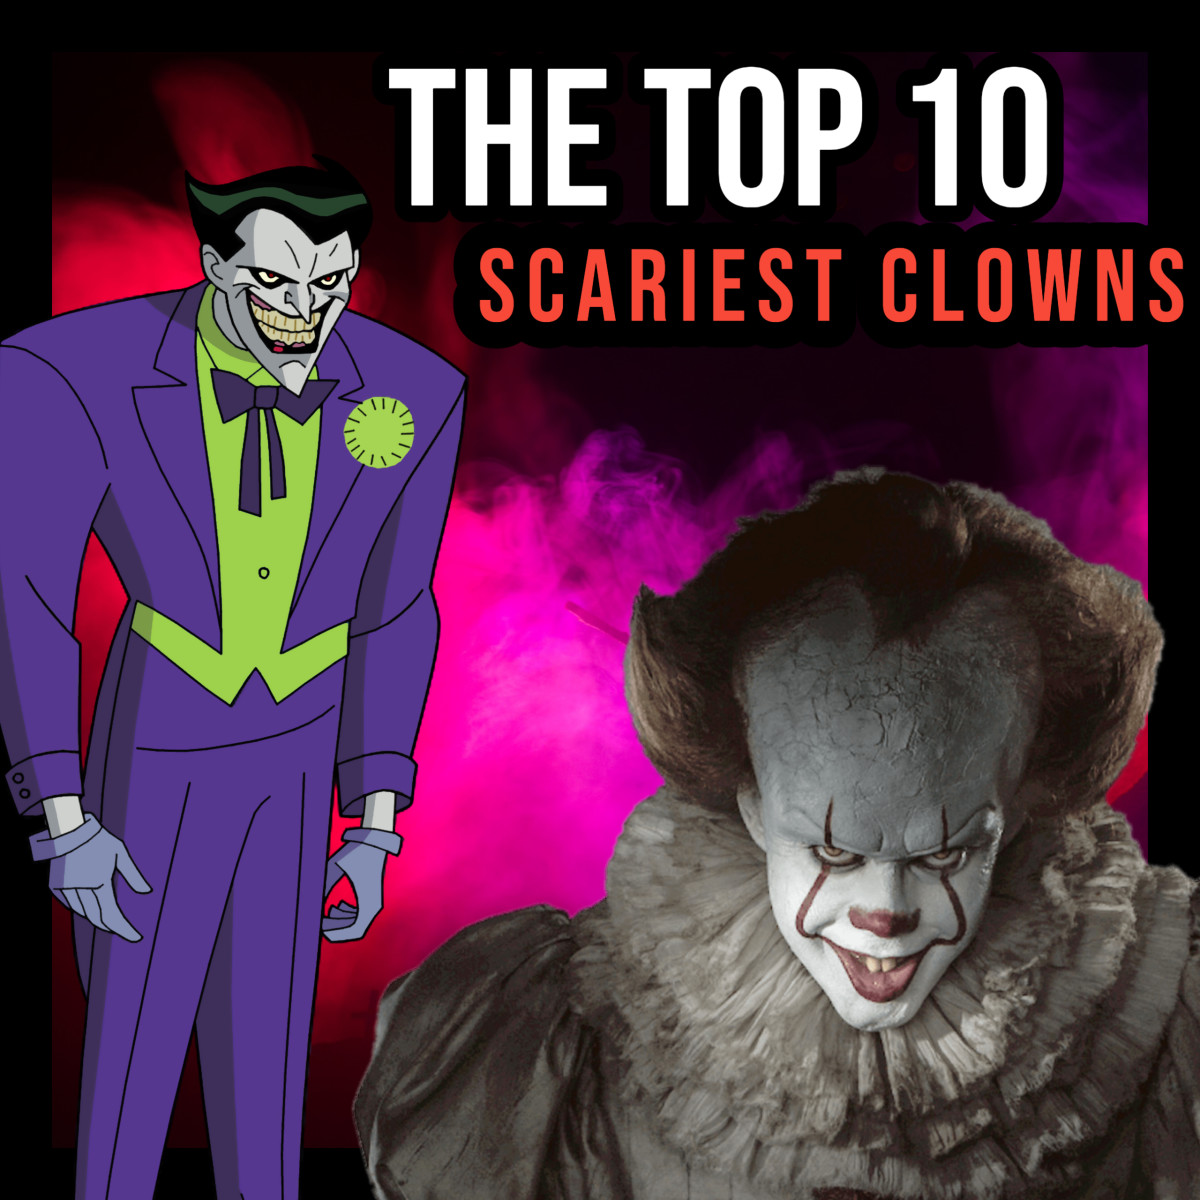 From Poltergeist to Pennywise, this article ranks the 10 scariest clowns of all time!